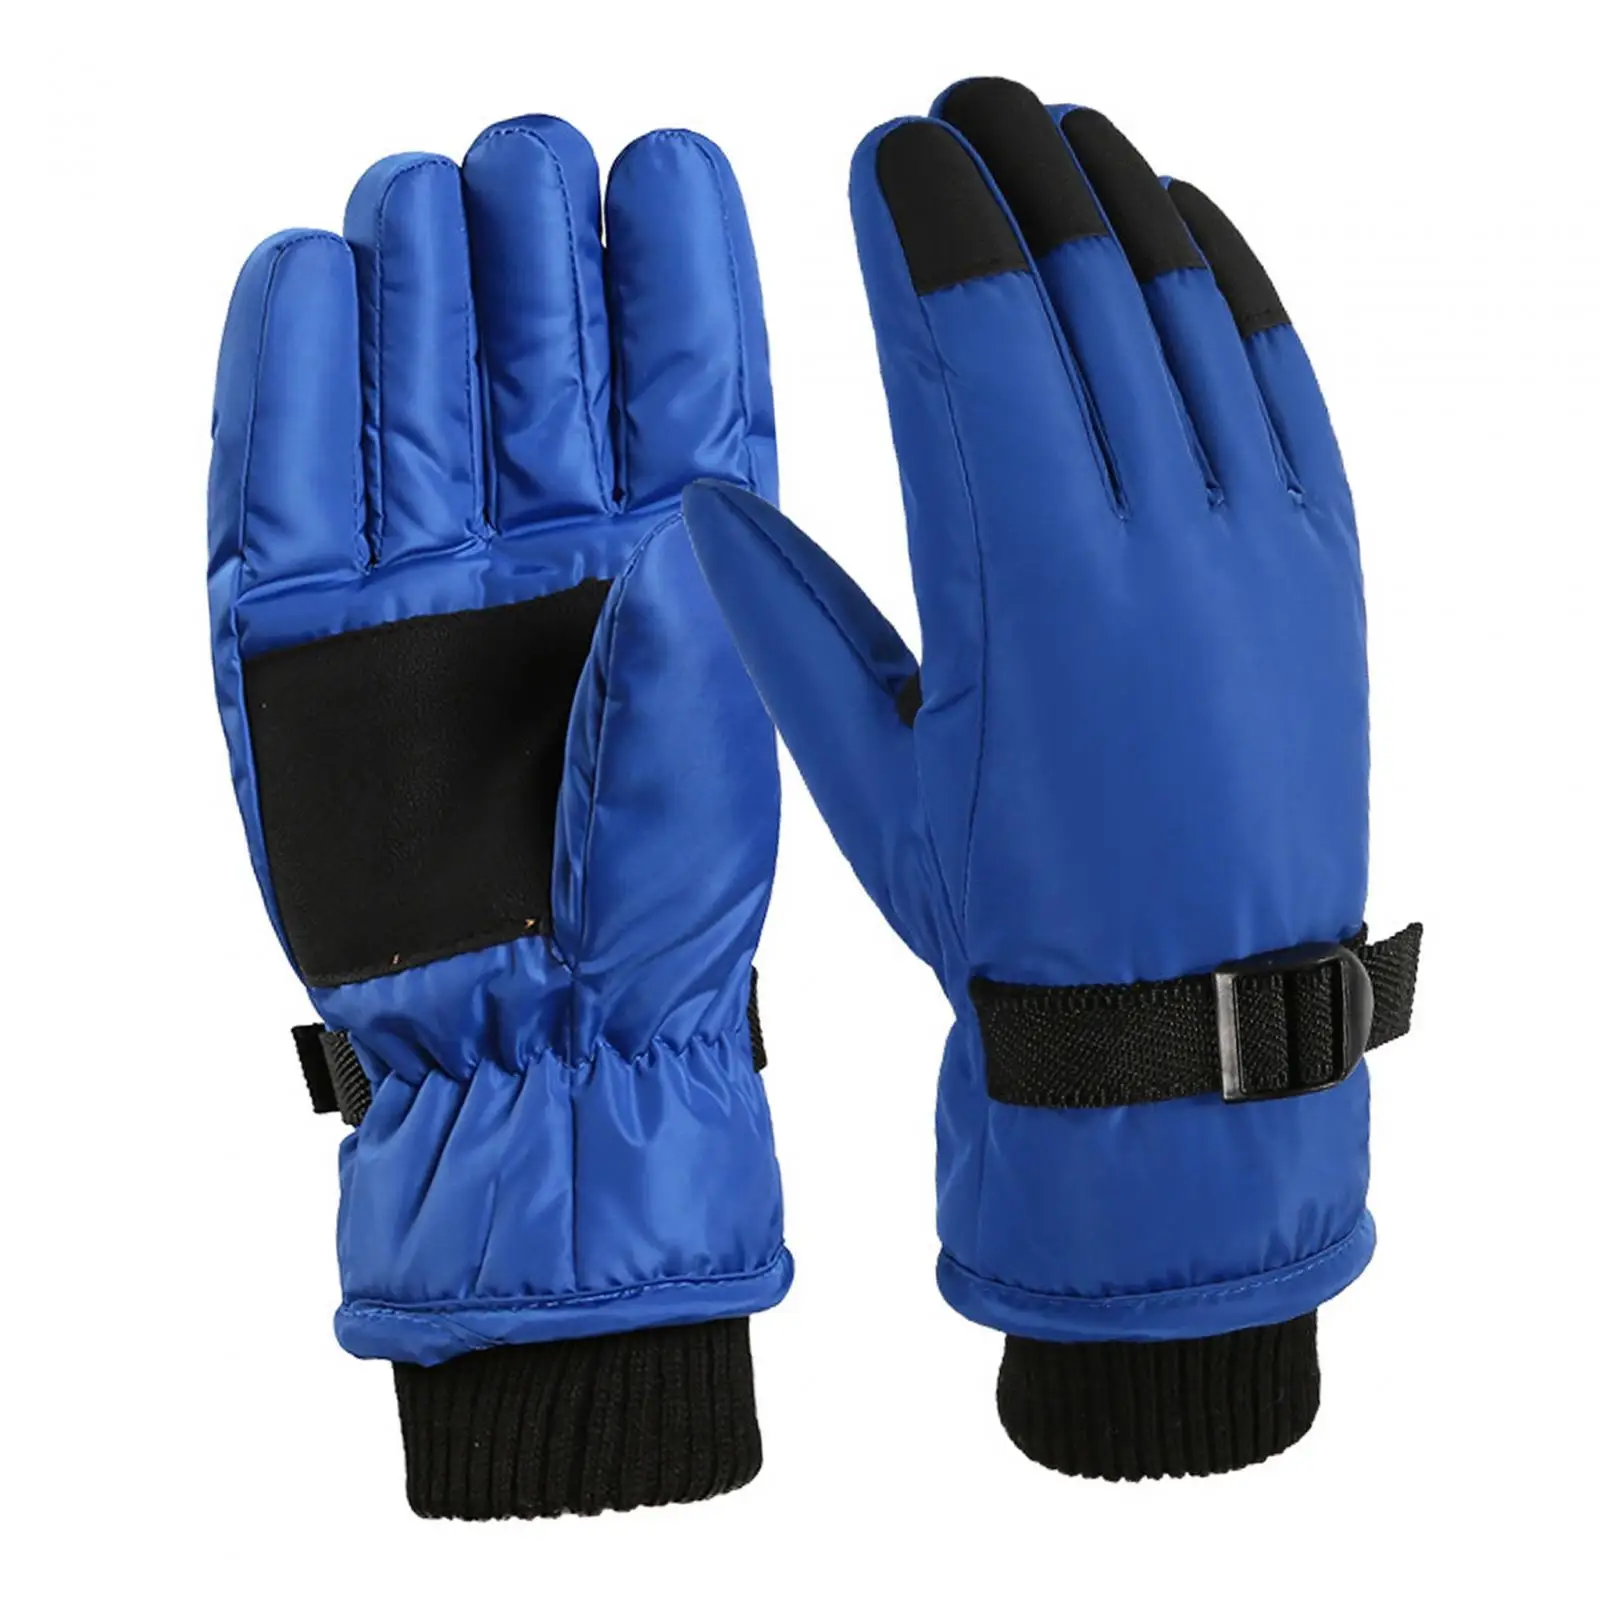 Winter Kids Gloves Mittens Thick Windproof Ski Gloves Gloves for Cold Weather for Children Girls Boys Cycling Skiing Snowboard